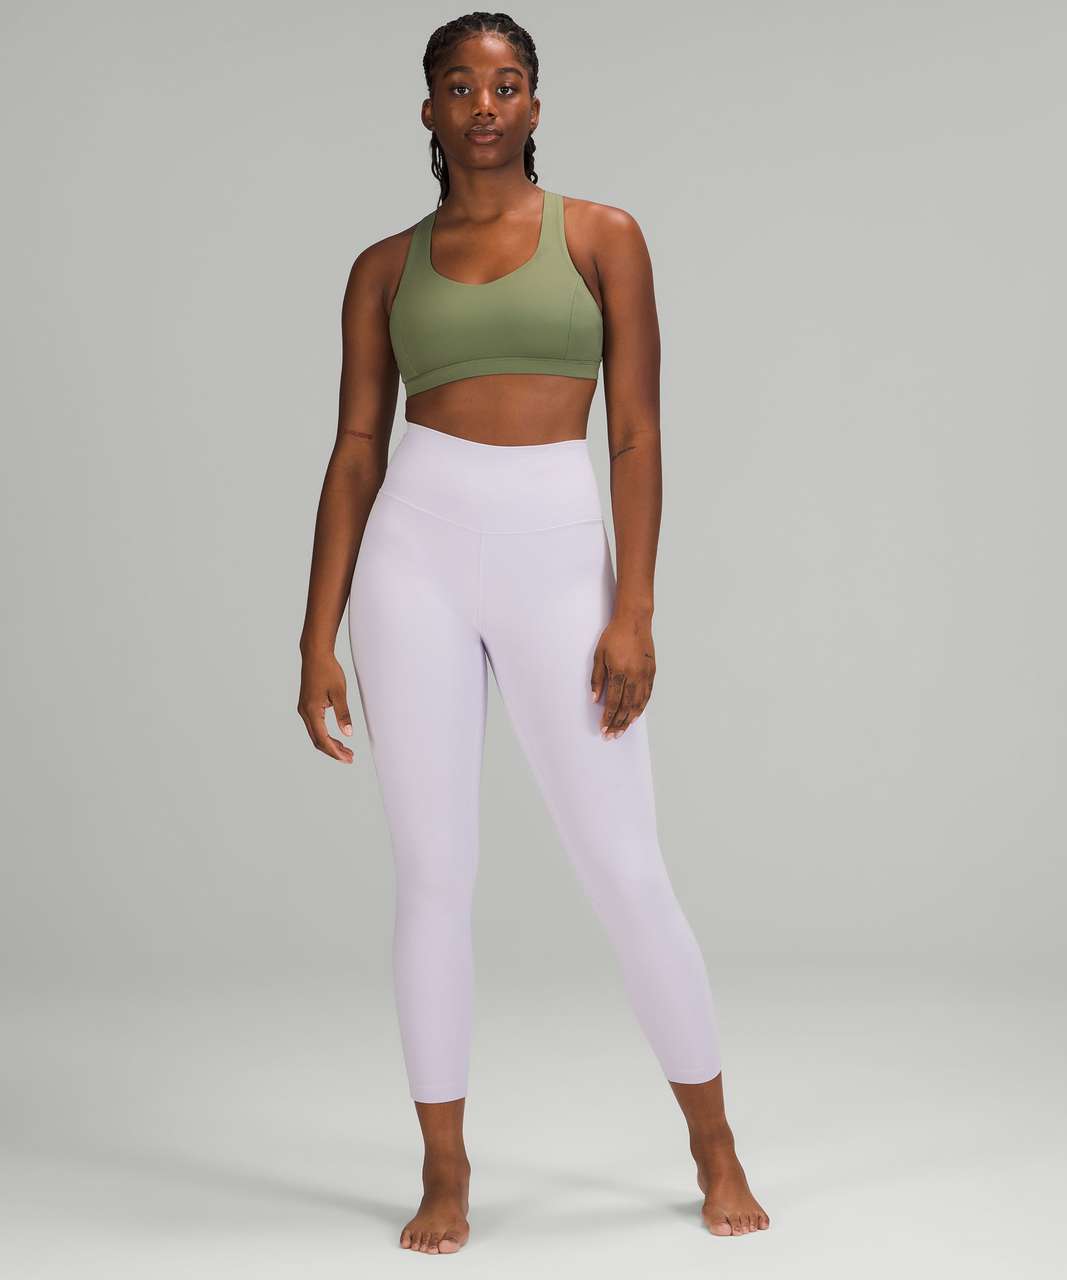 Lululemon Free to Be Serene Bra *Light Support, C/D Cup - Green Twill